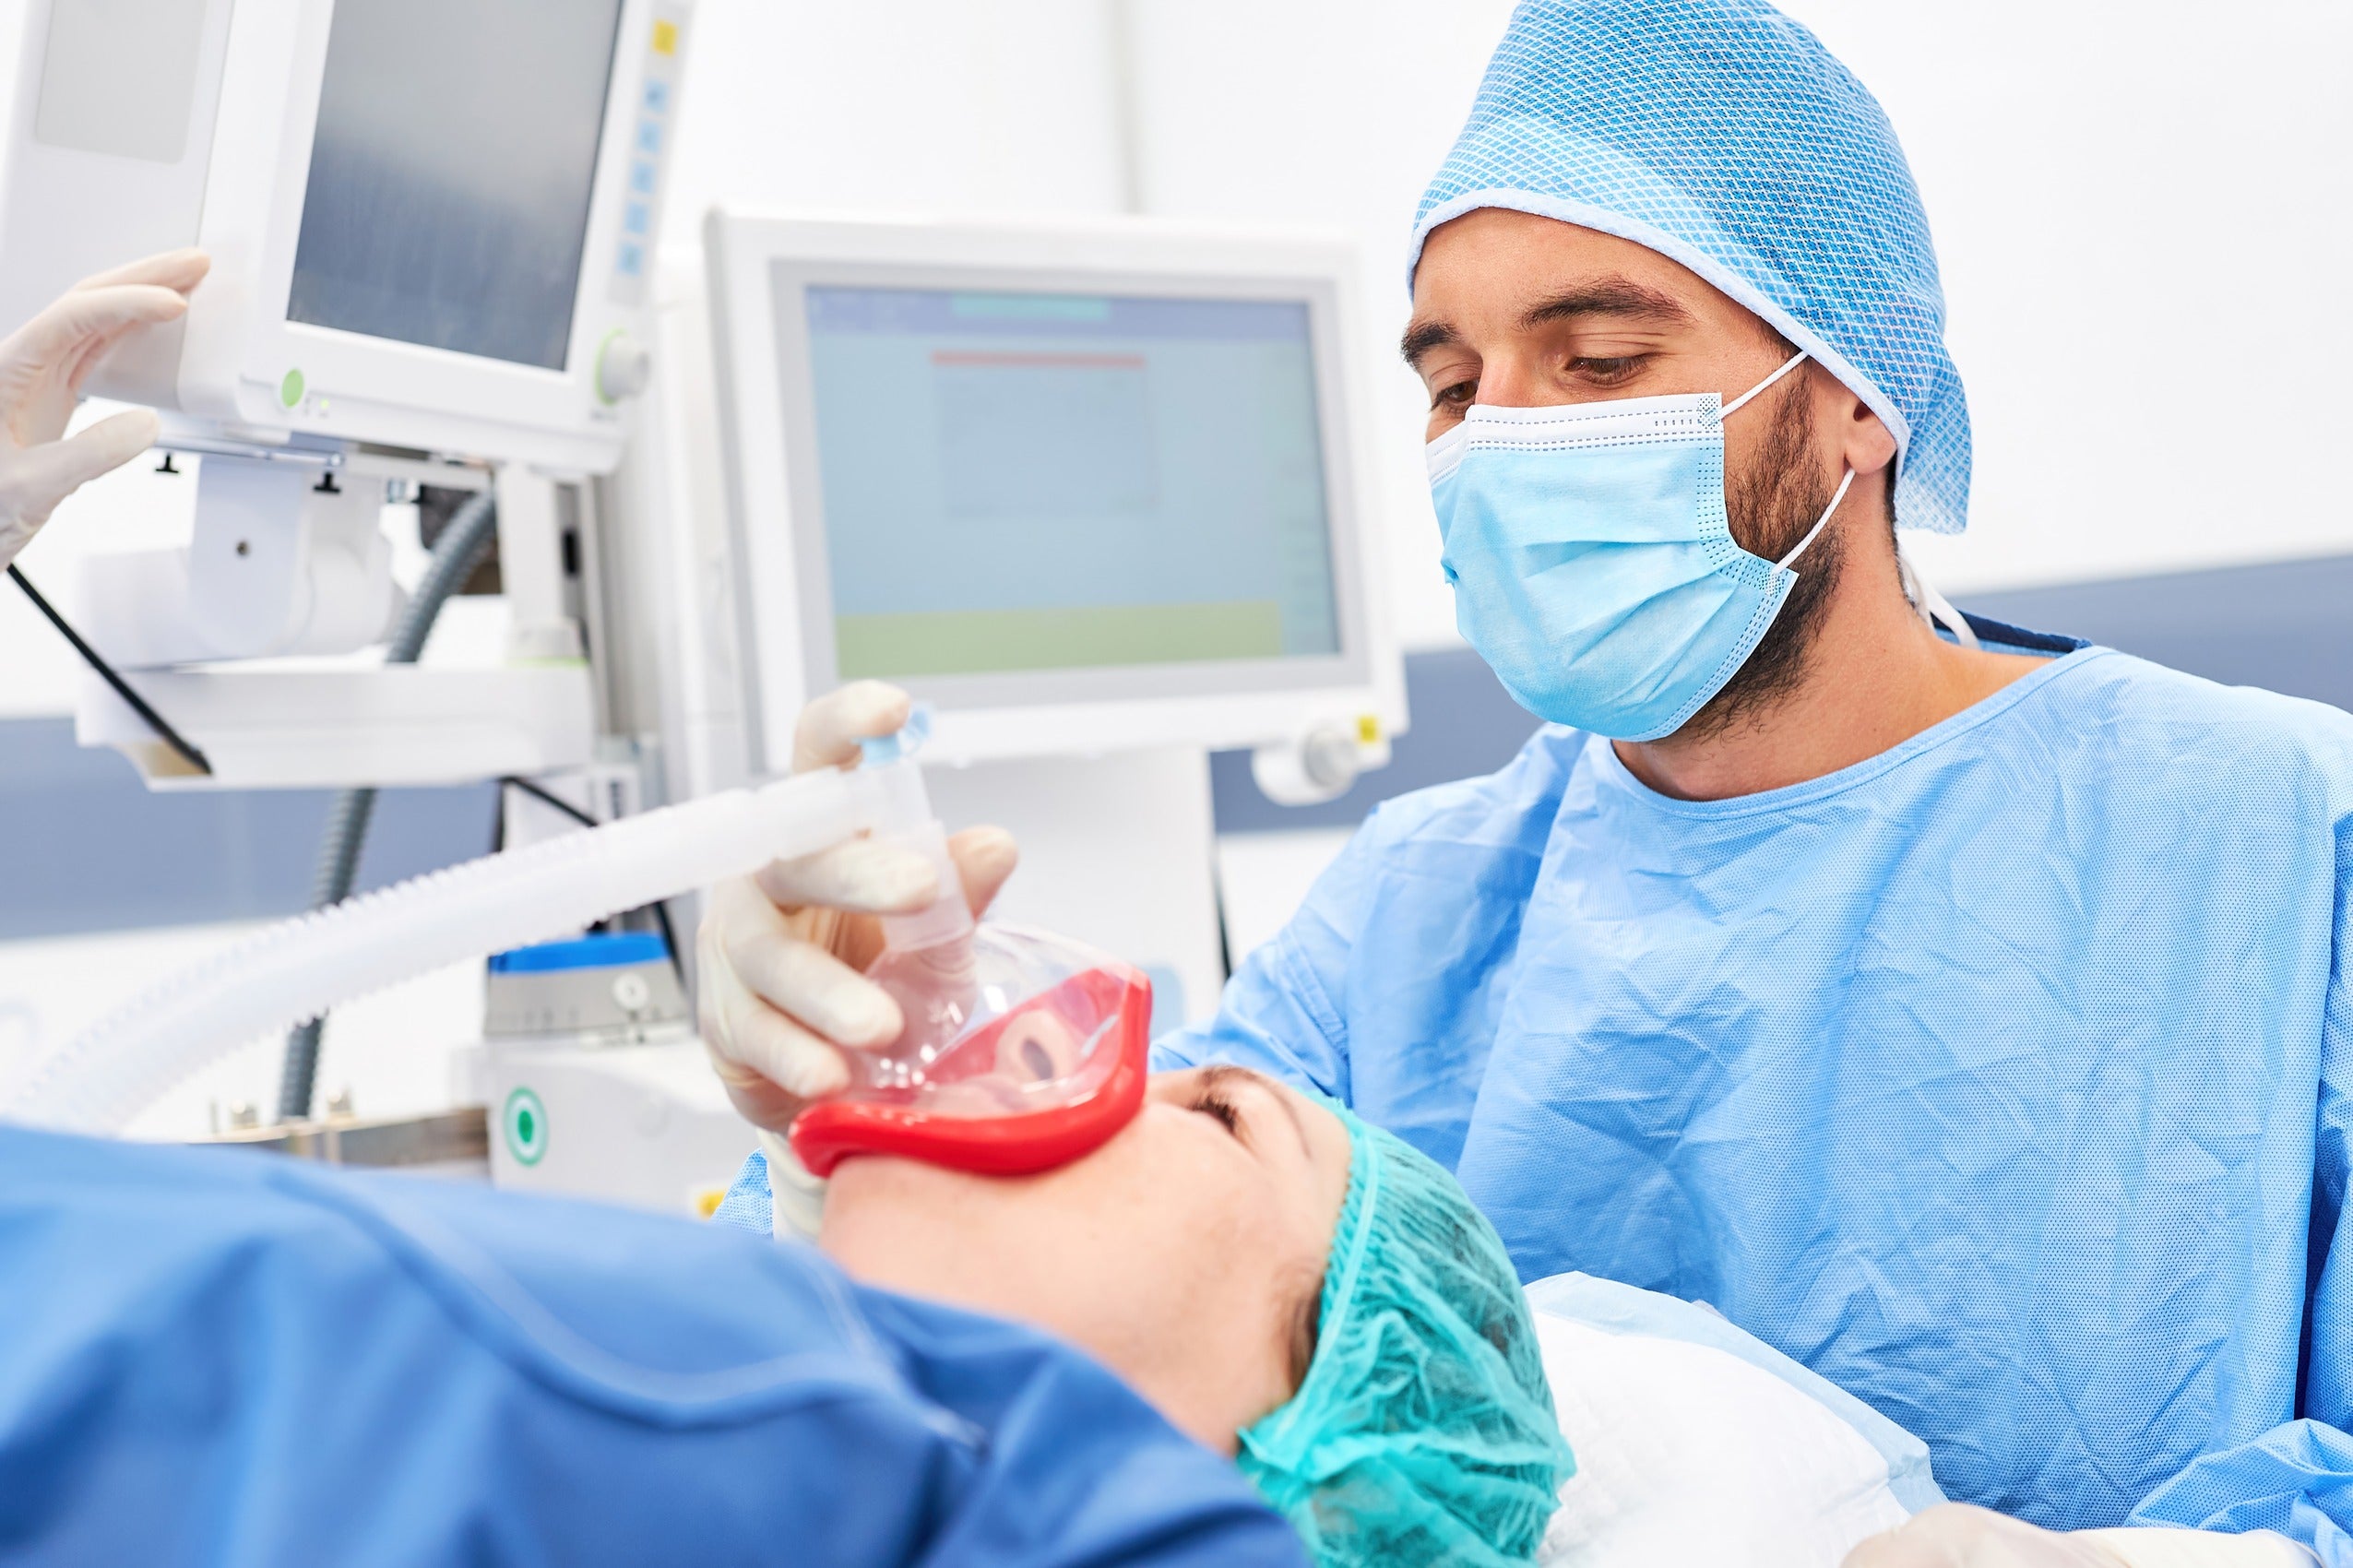 Complications and risks associated with anesthesia